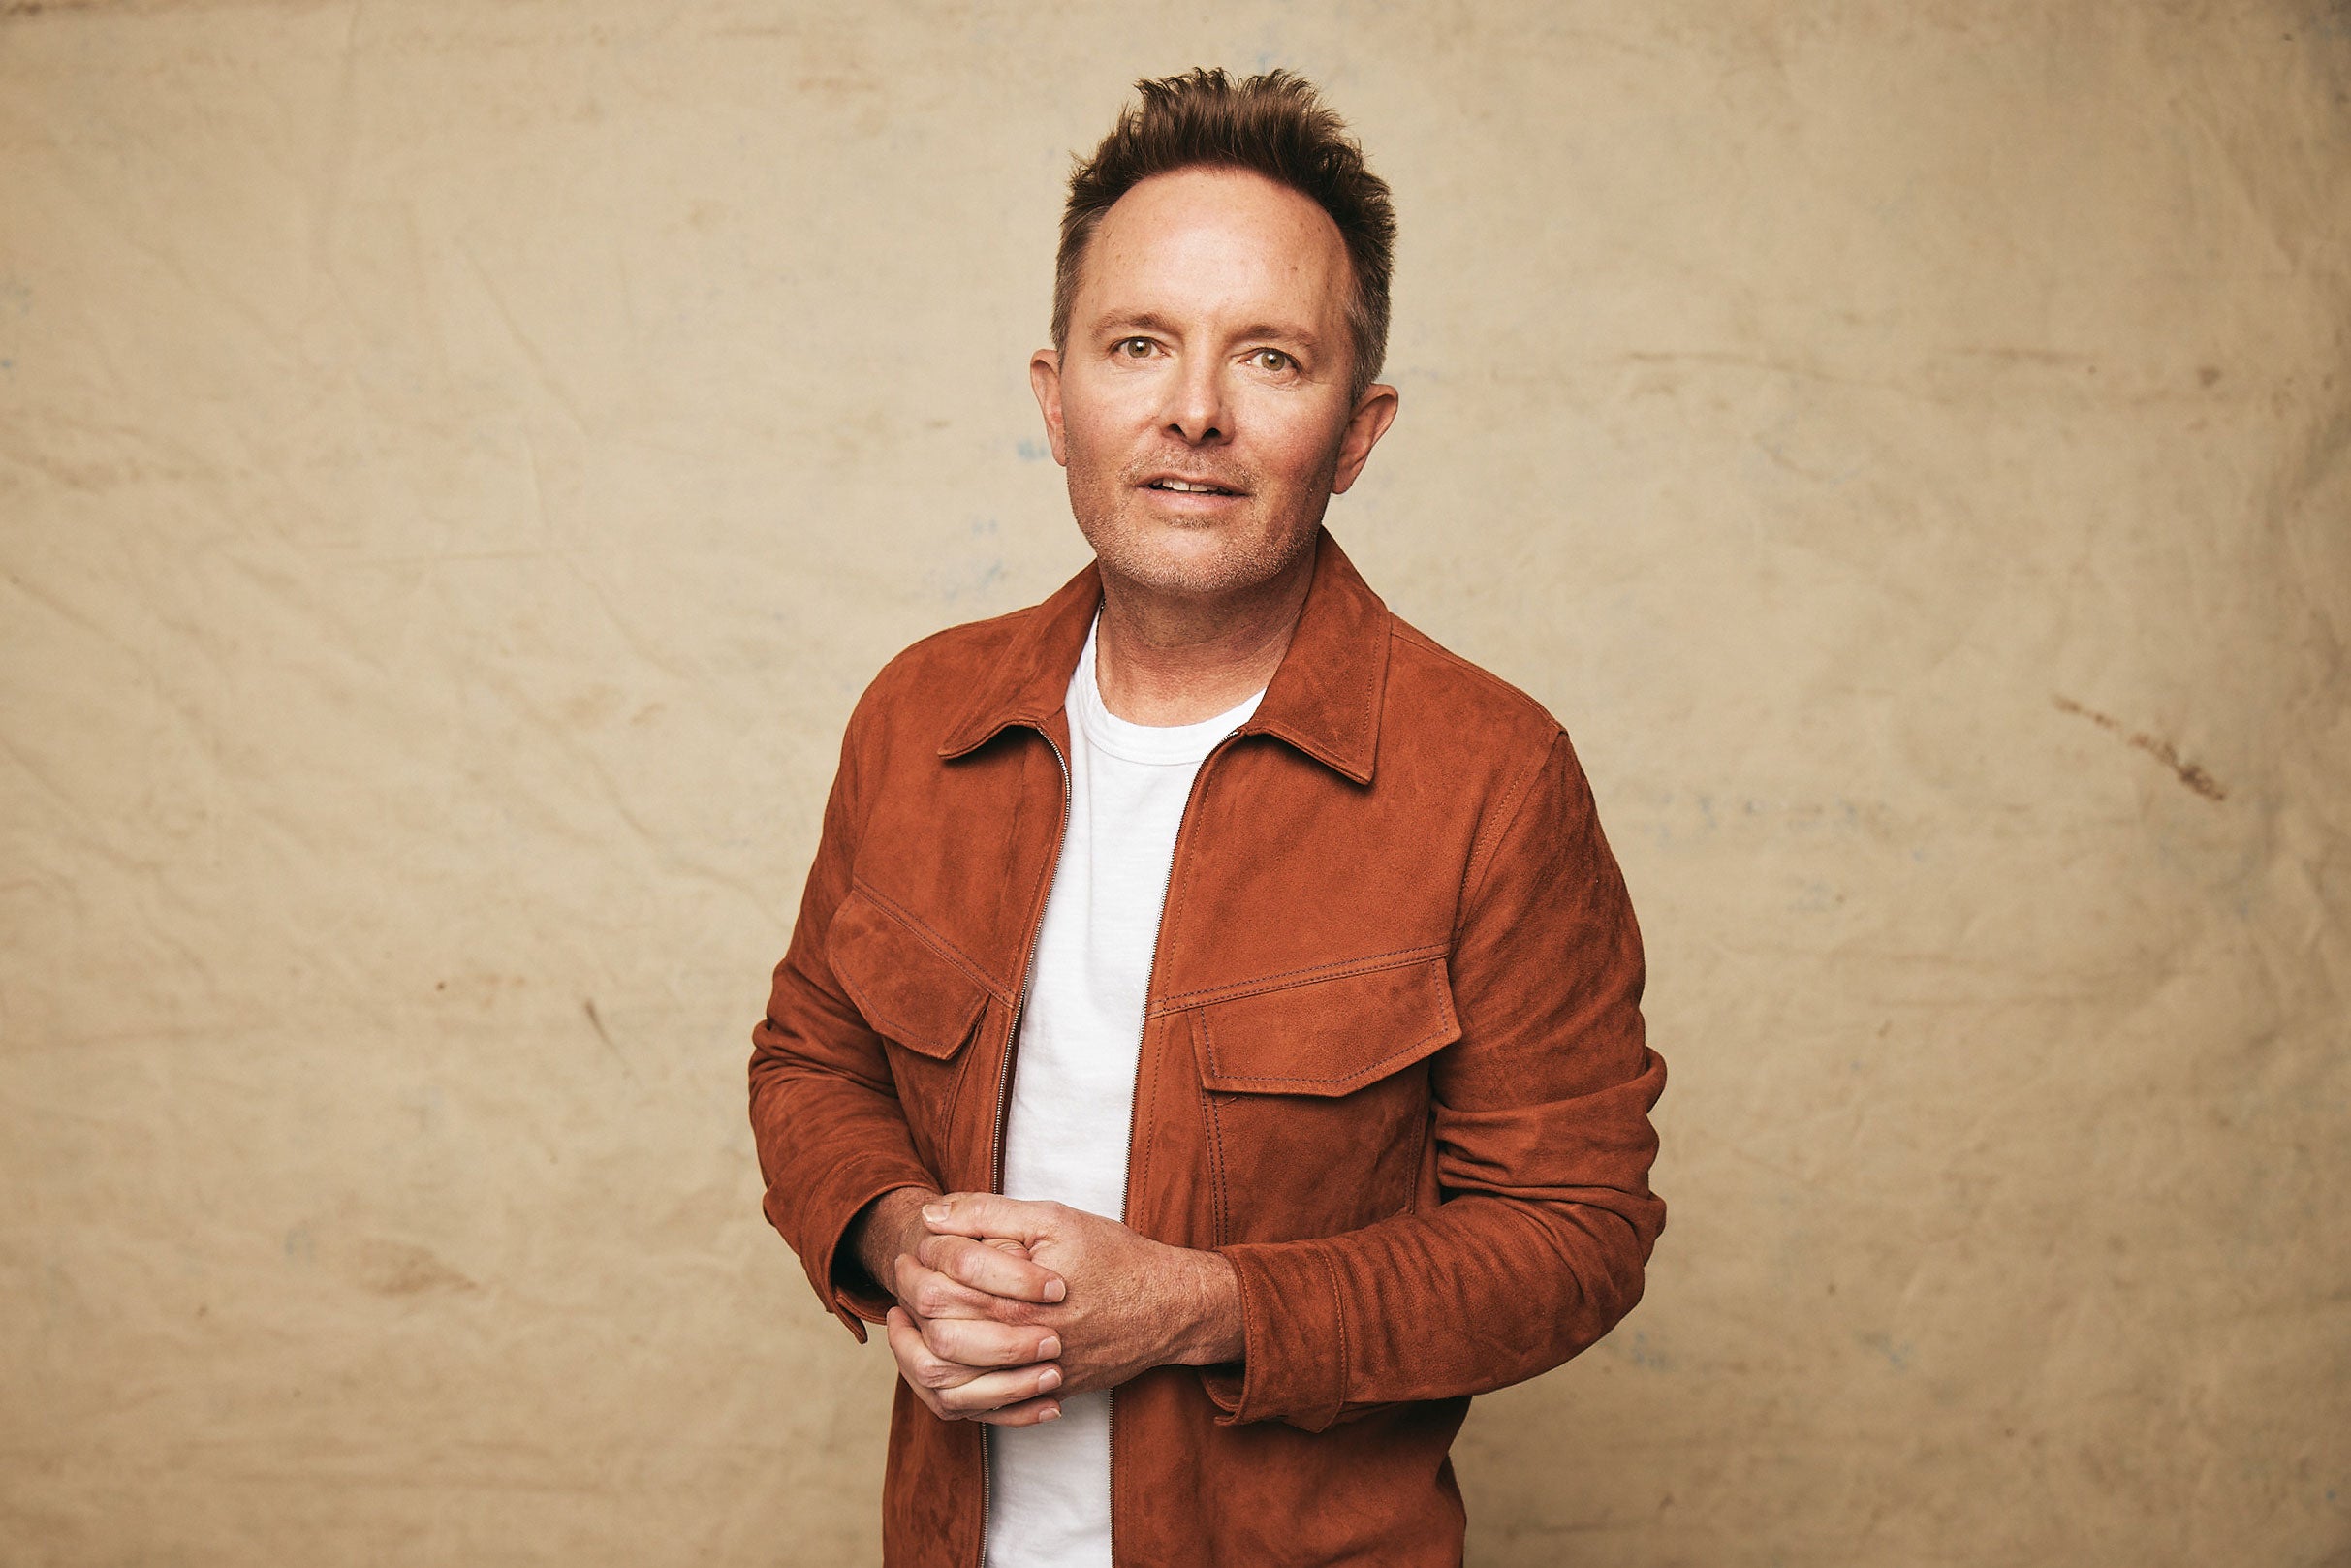 An Evening of Worship with Chris Tomlin free presale password for early tickets in Carrollton